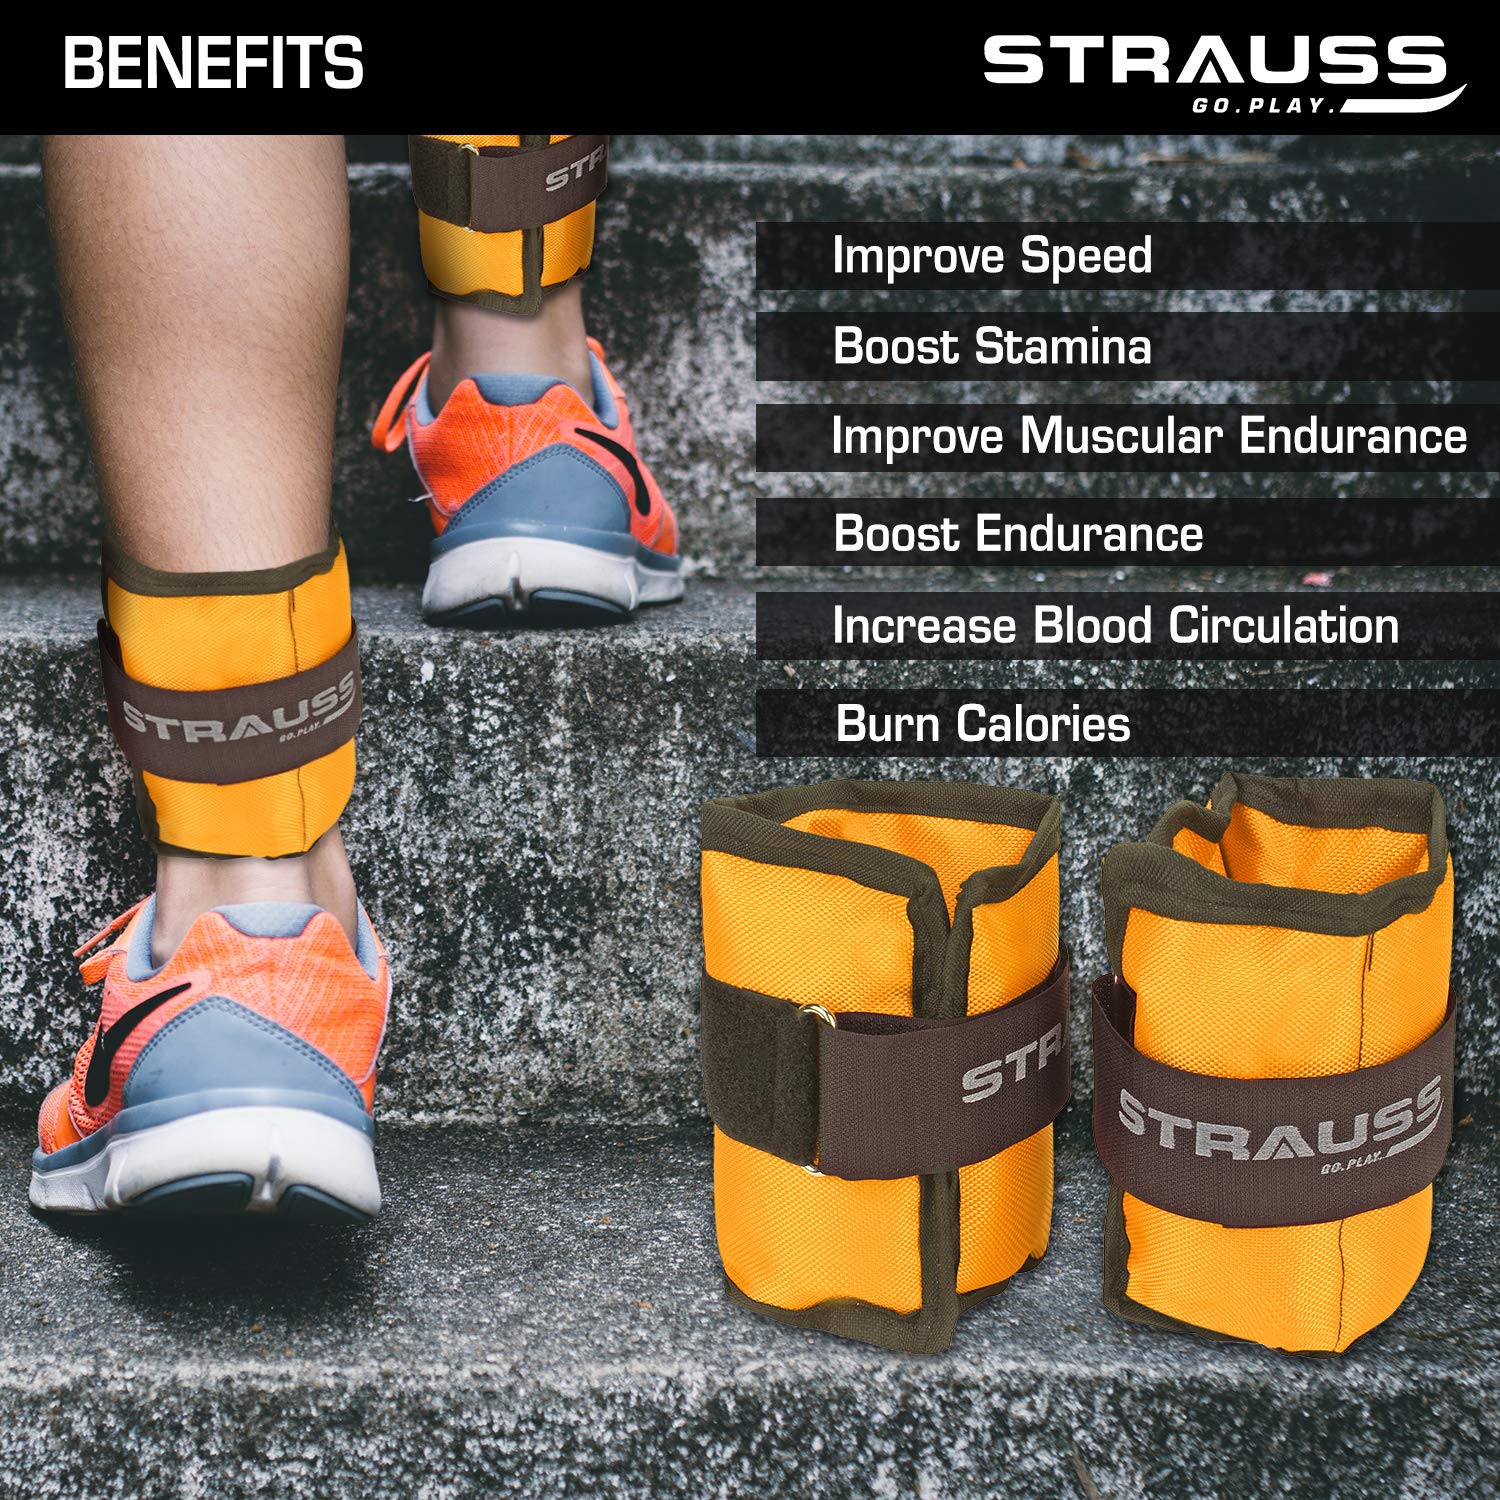 Strauss Adjustable Ankle/Wrist Weights 1 KG X 2 | Ideal for Walking, Running, Jogging, Cycling, Gym, Workout & Strength Training | Easy to Use on Ankle, Wrist, Leg, (Yellow)